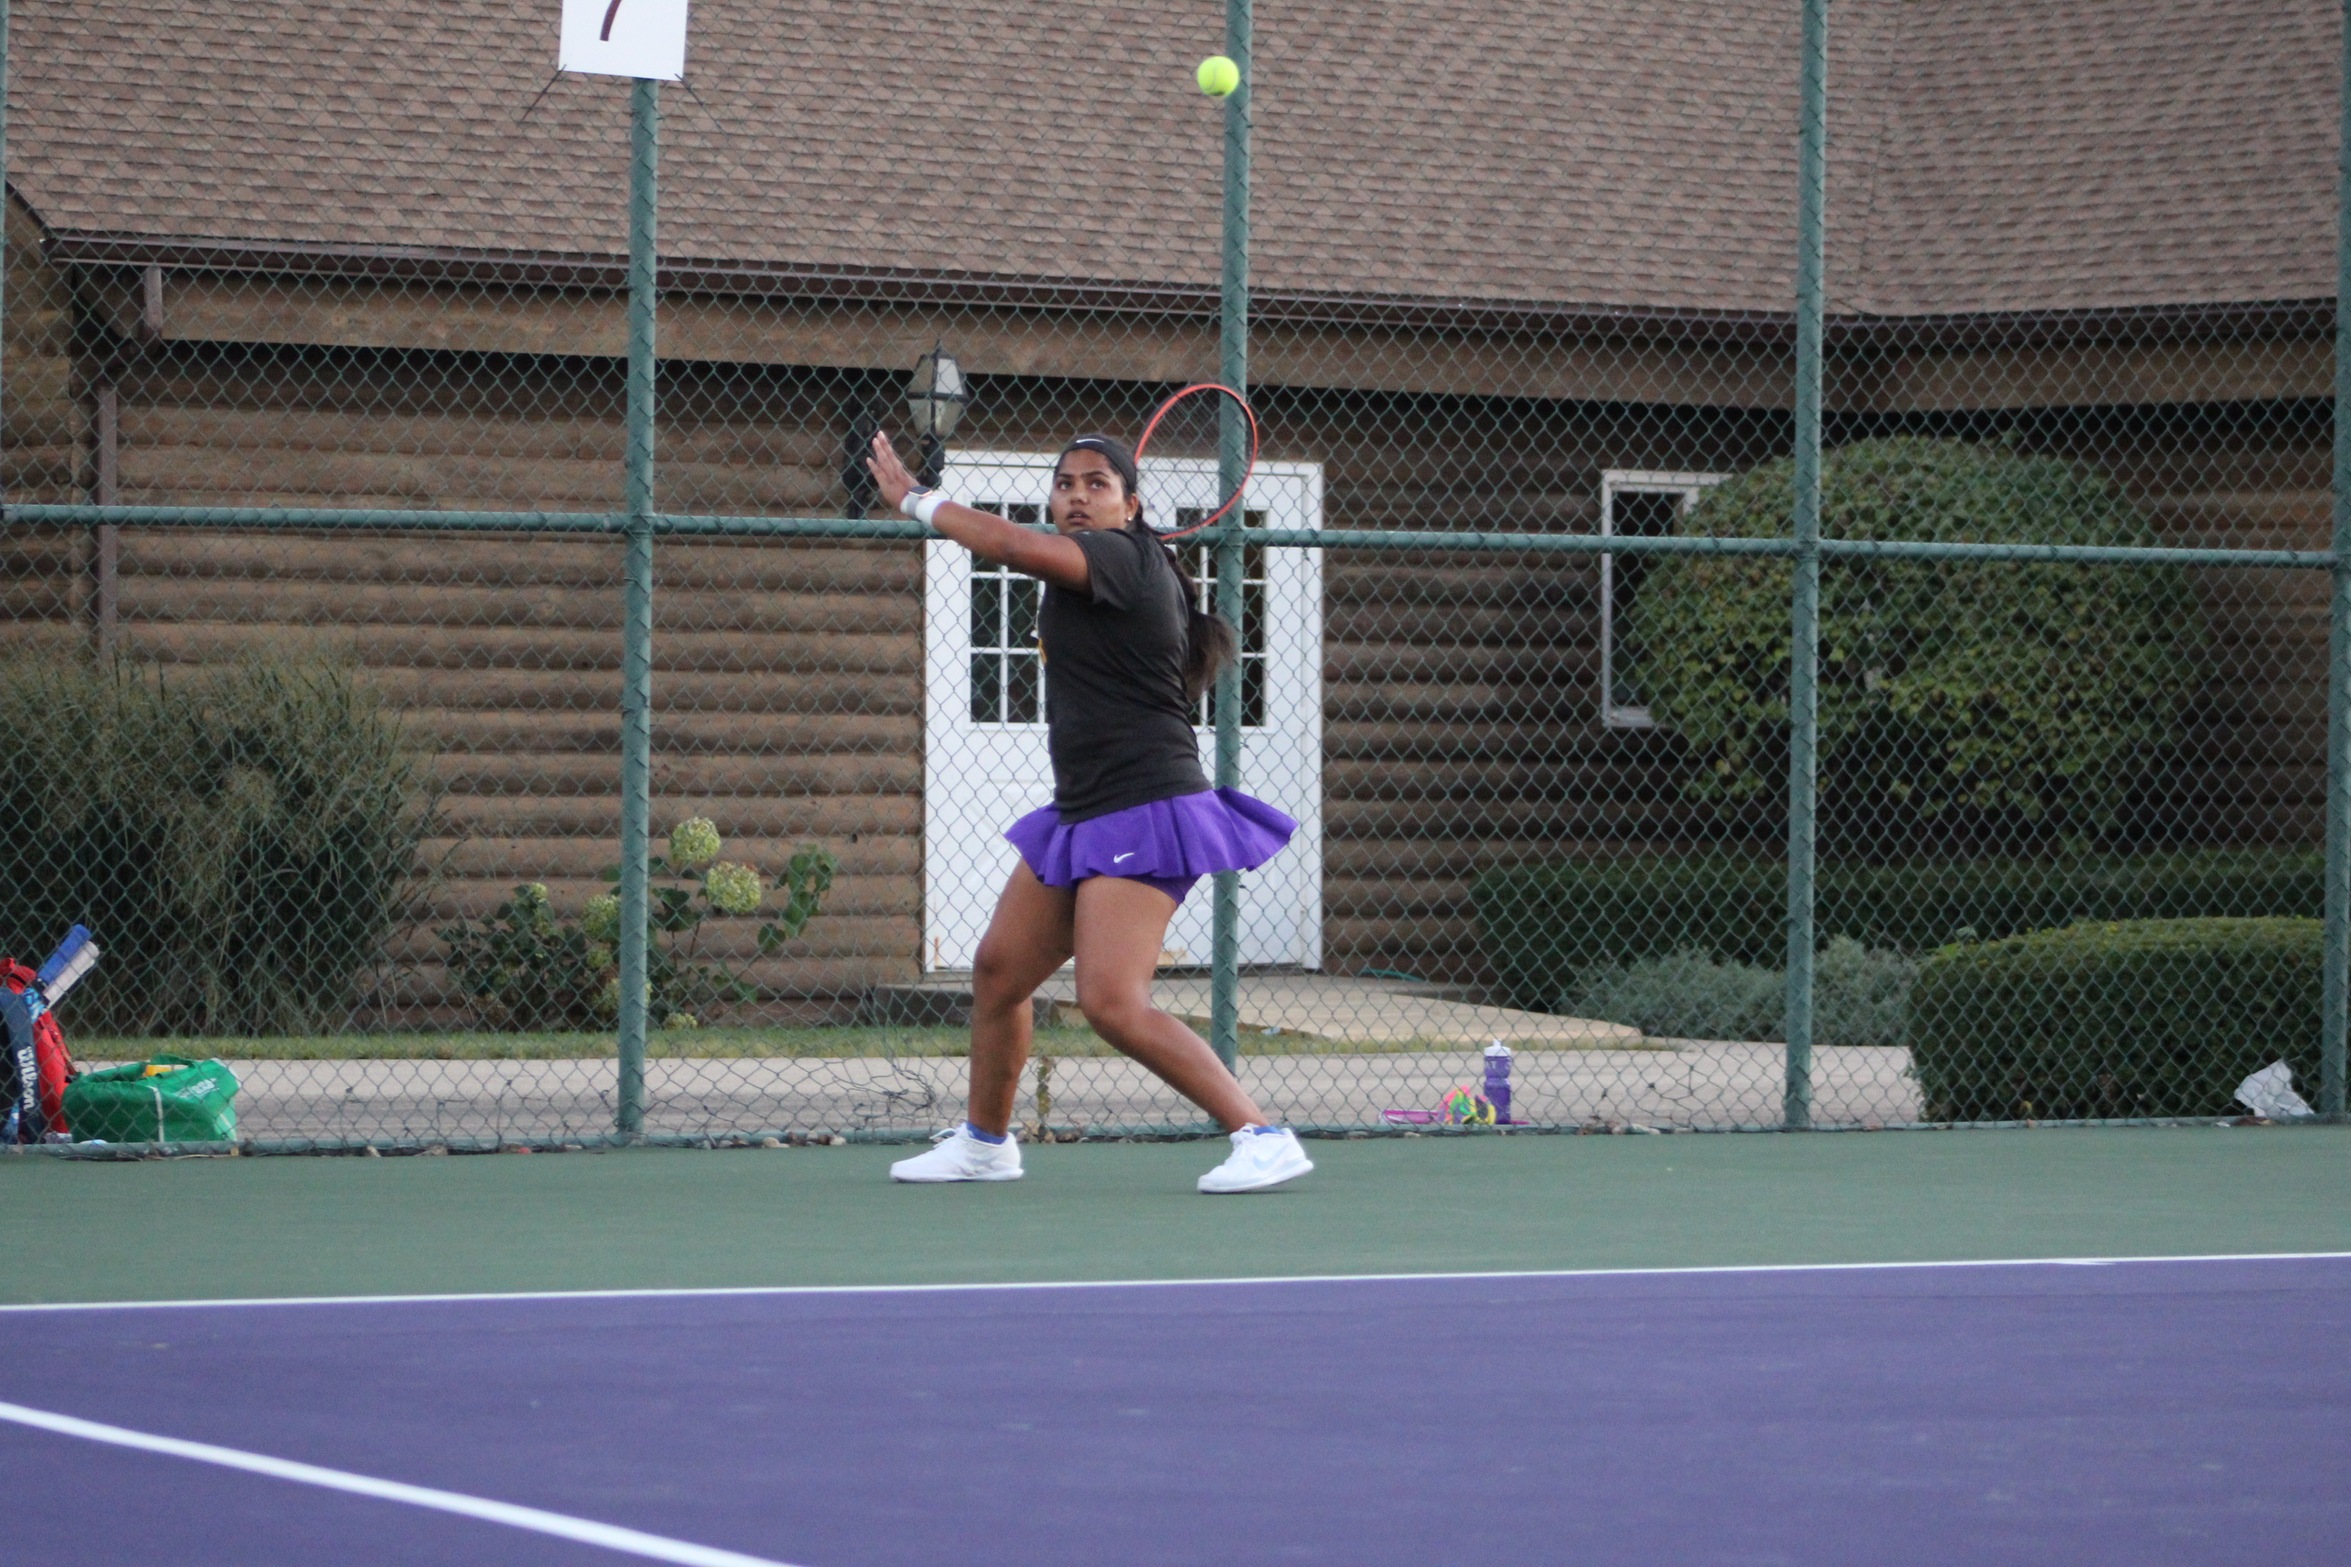 TIGERS WOMEN'S TENNIS BEGIN CCAC PLAY WITH 4-1 WIN AT ST. FRANCIS